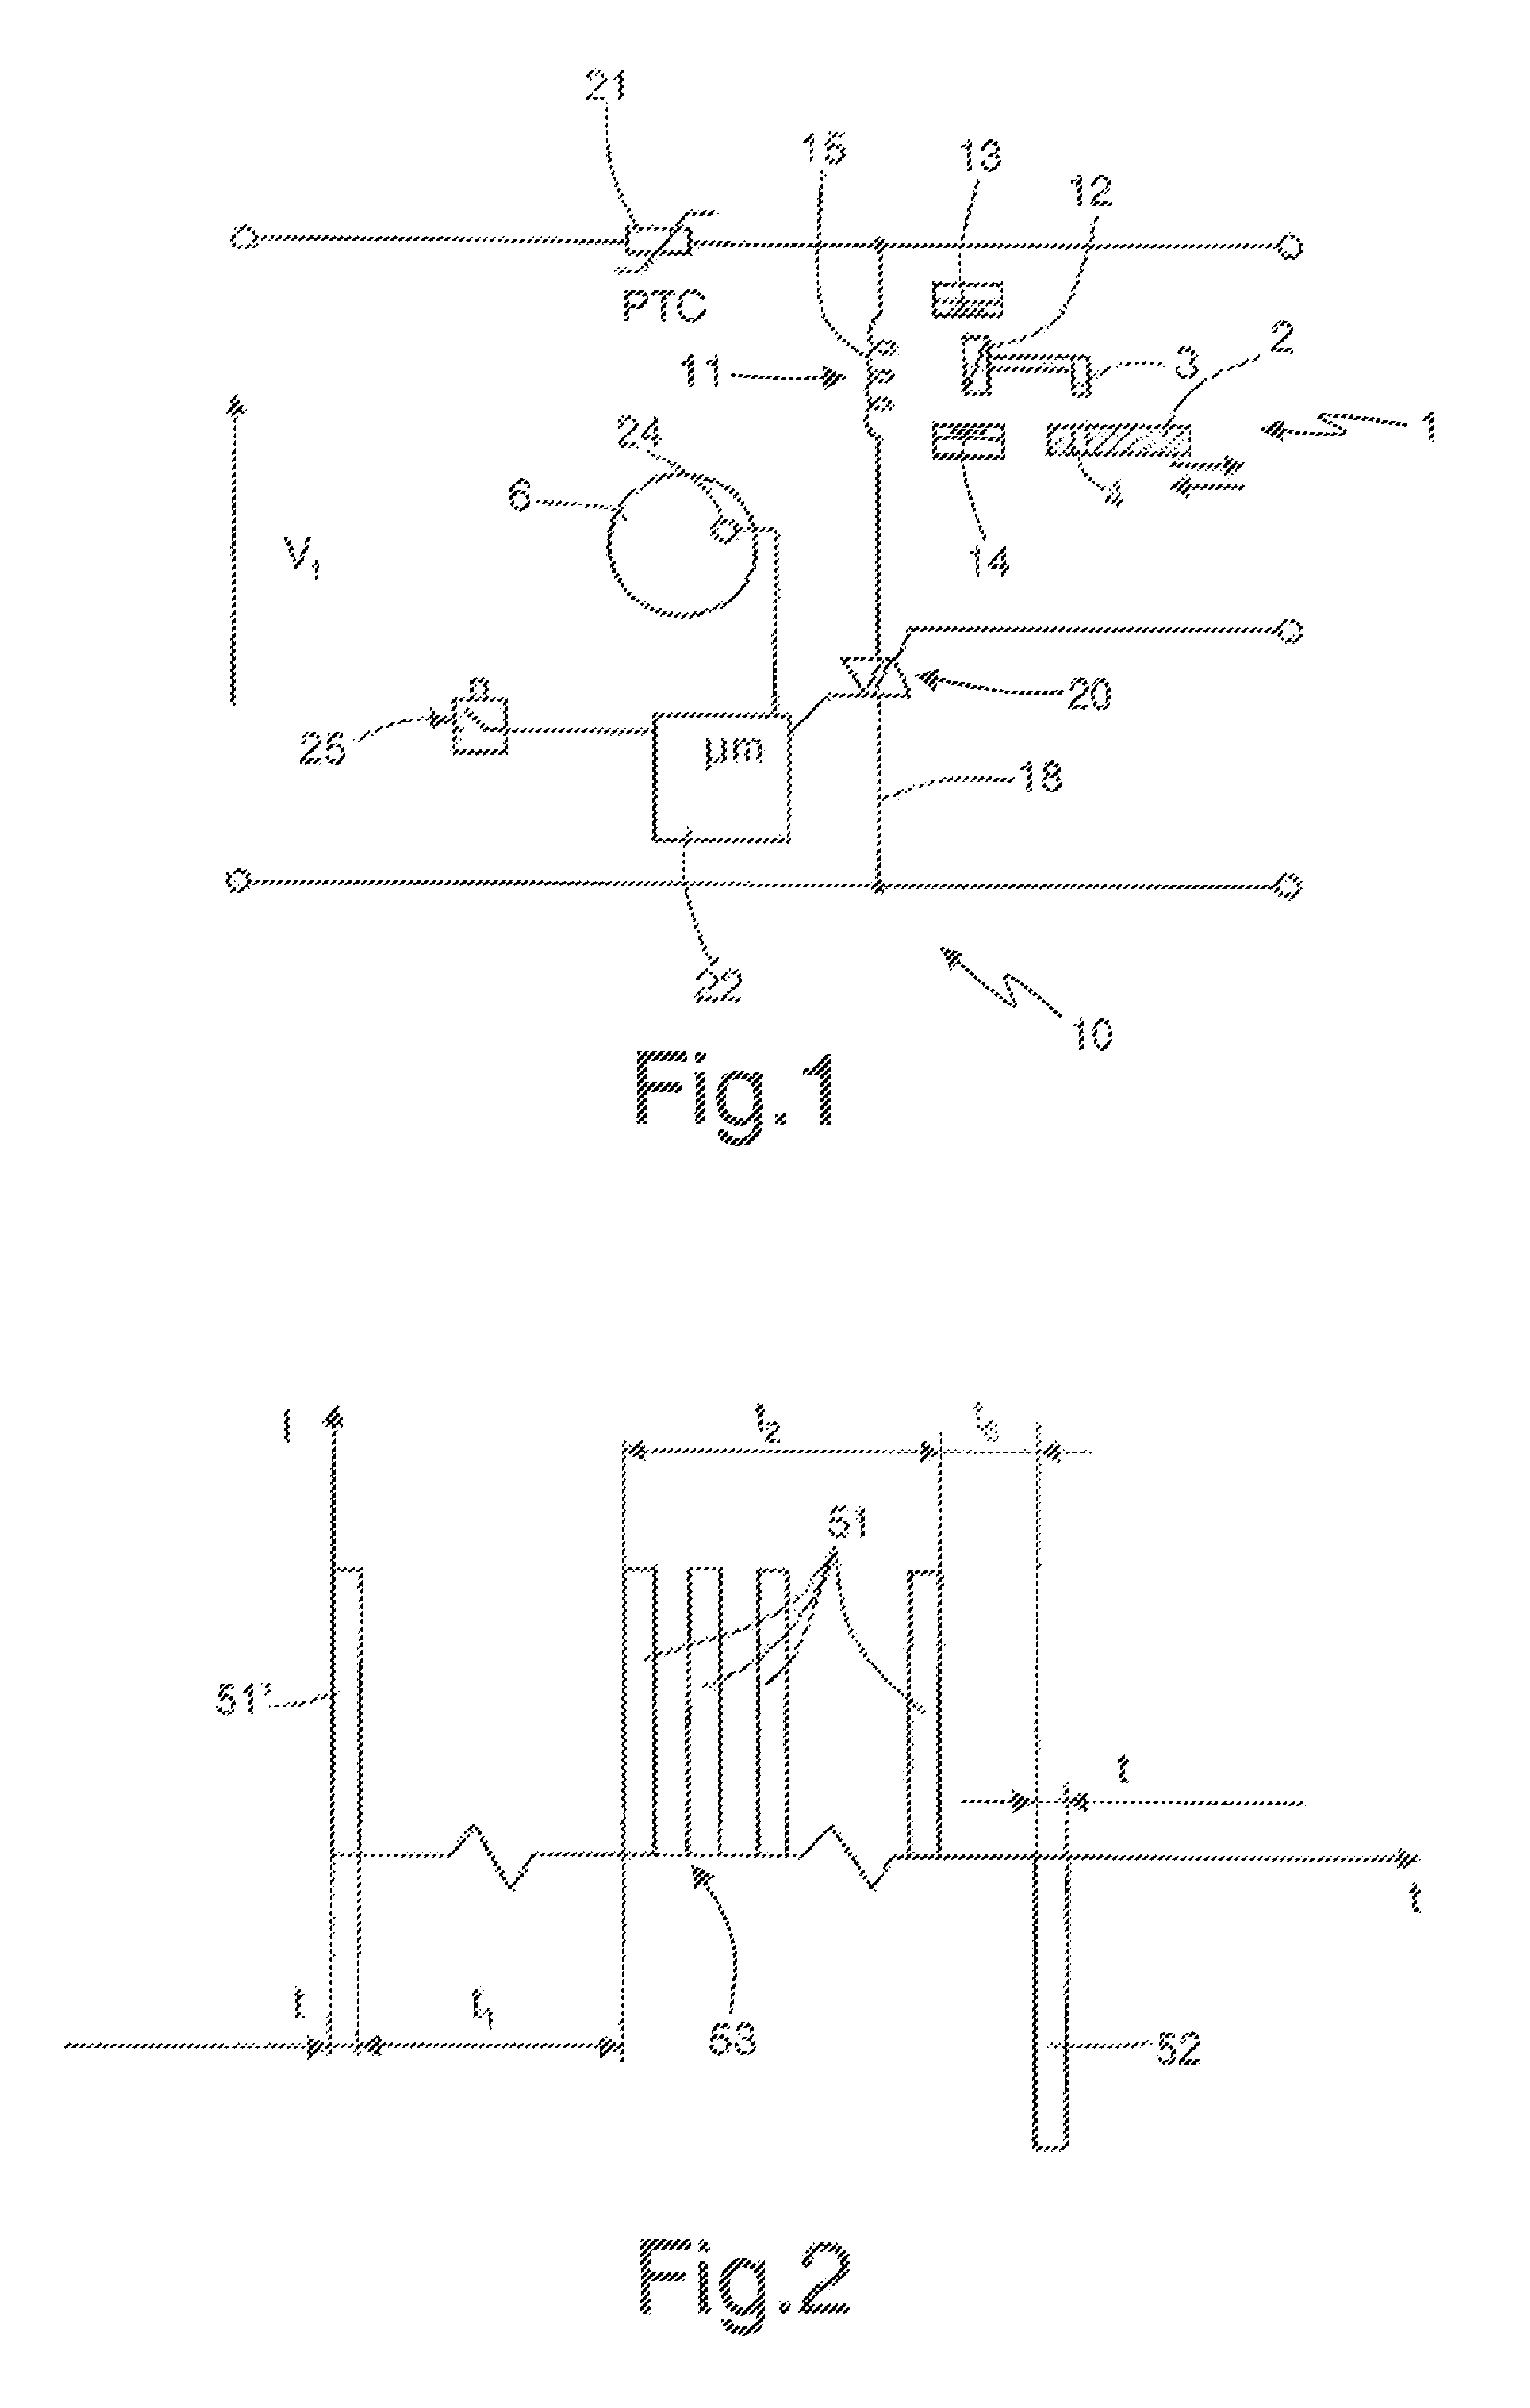 Safety control system for an electromagnetic door lock of an electric household appliance